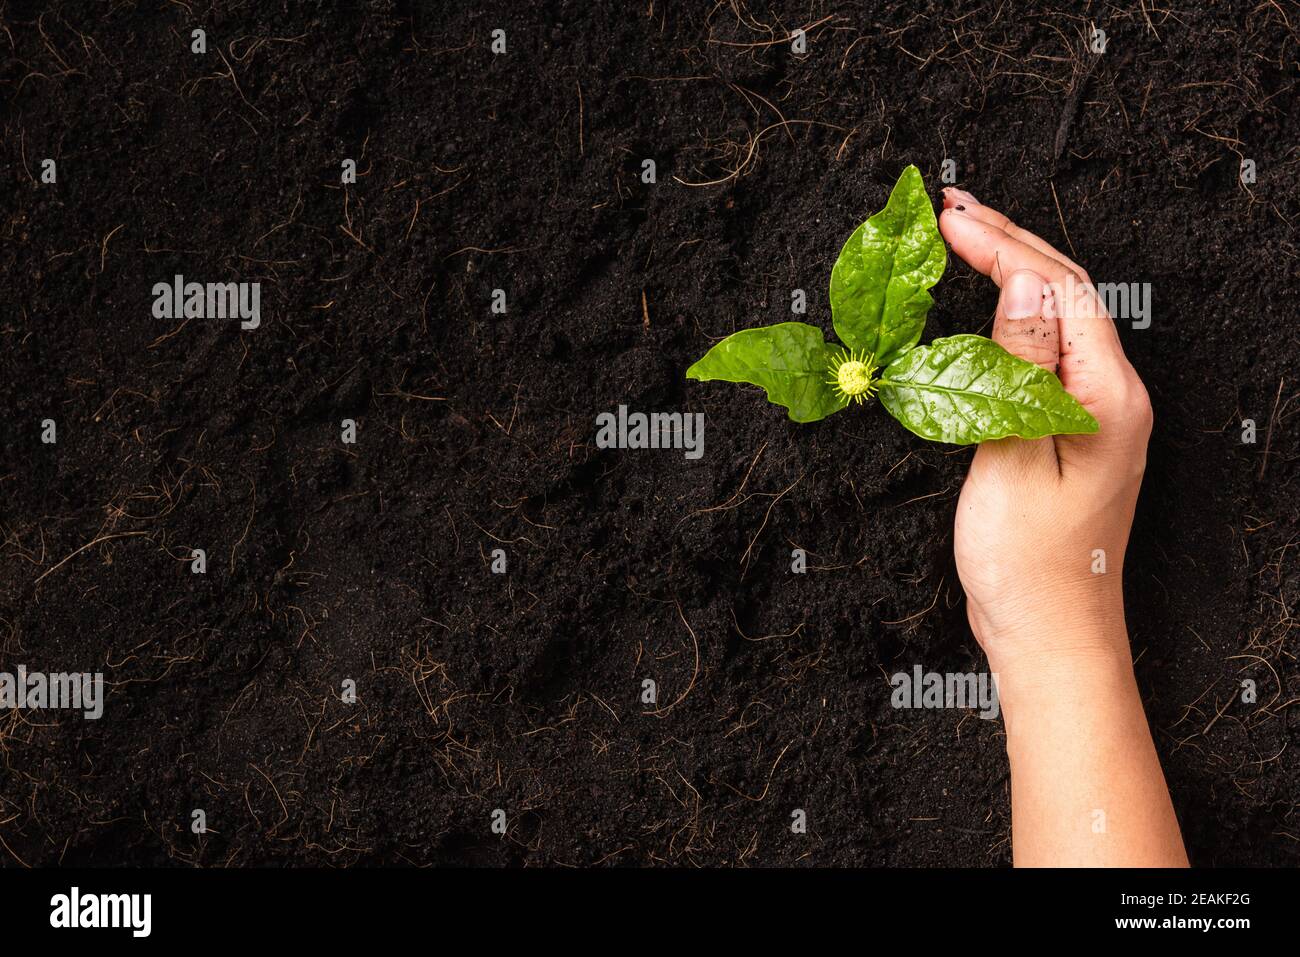 Hand of a woman planting green small plant life on compost fertile black soil Stock Photo